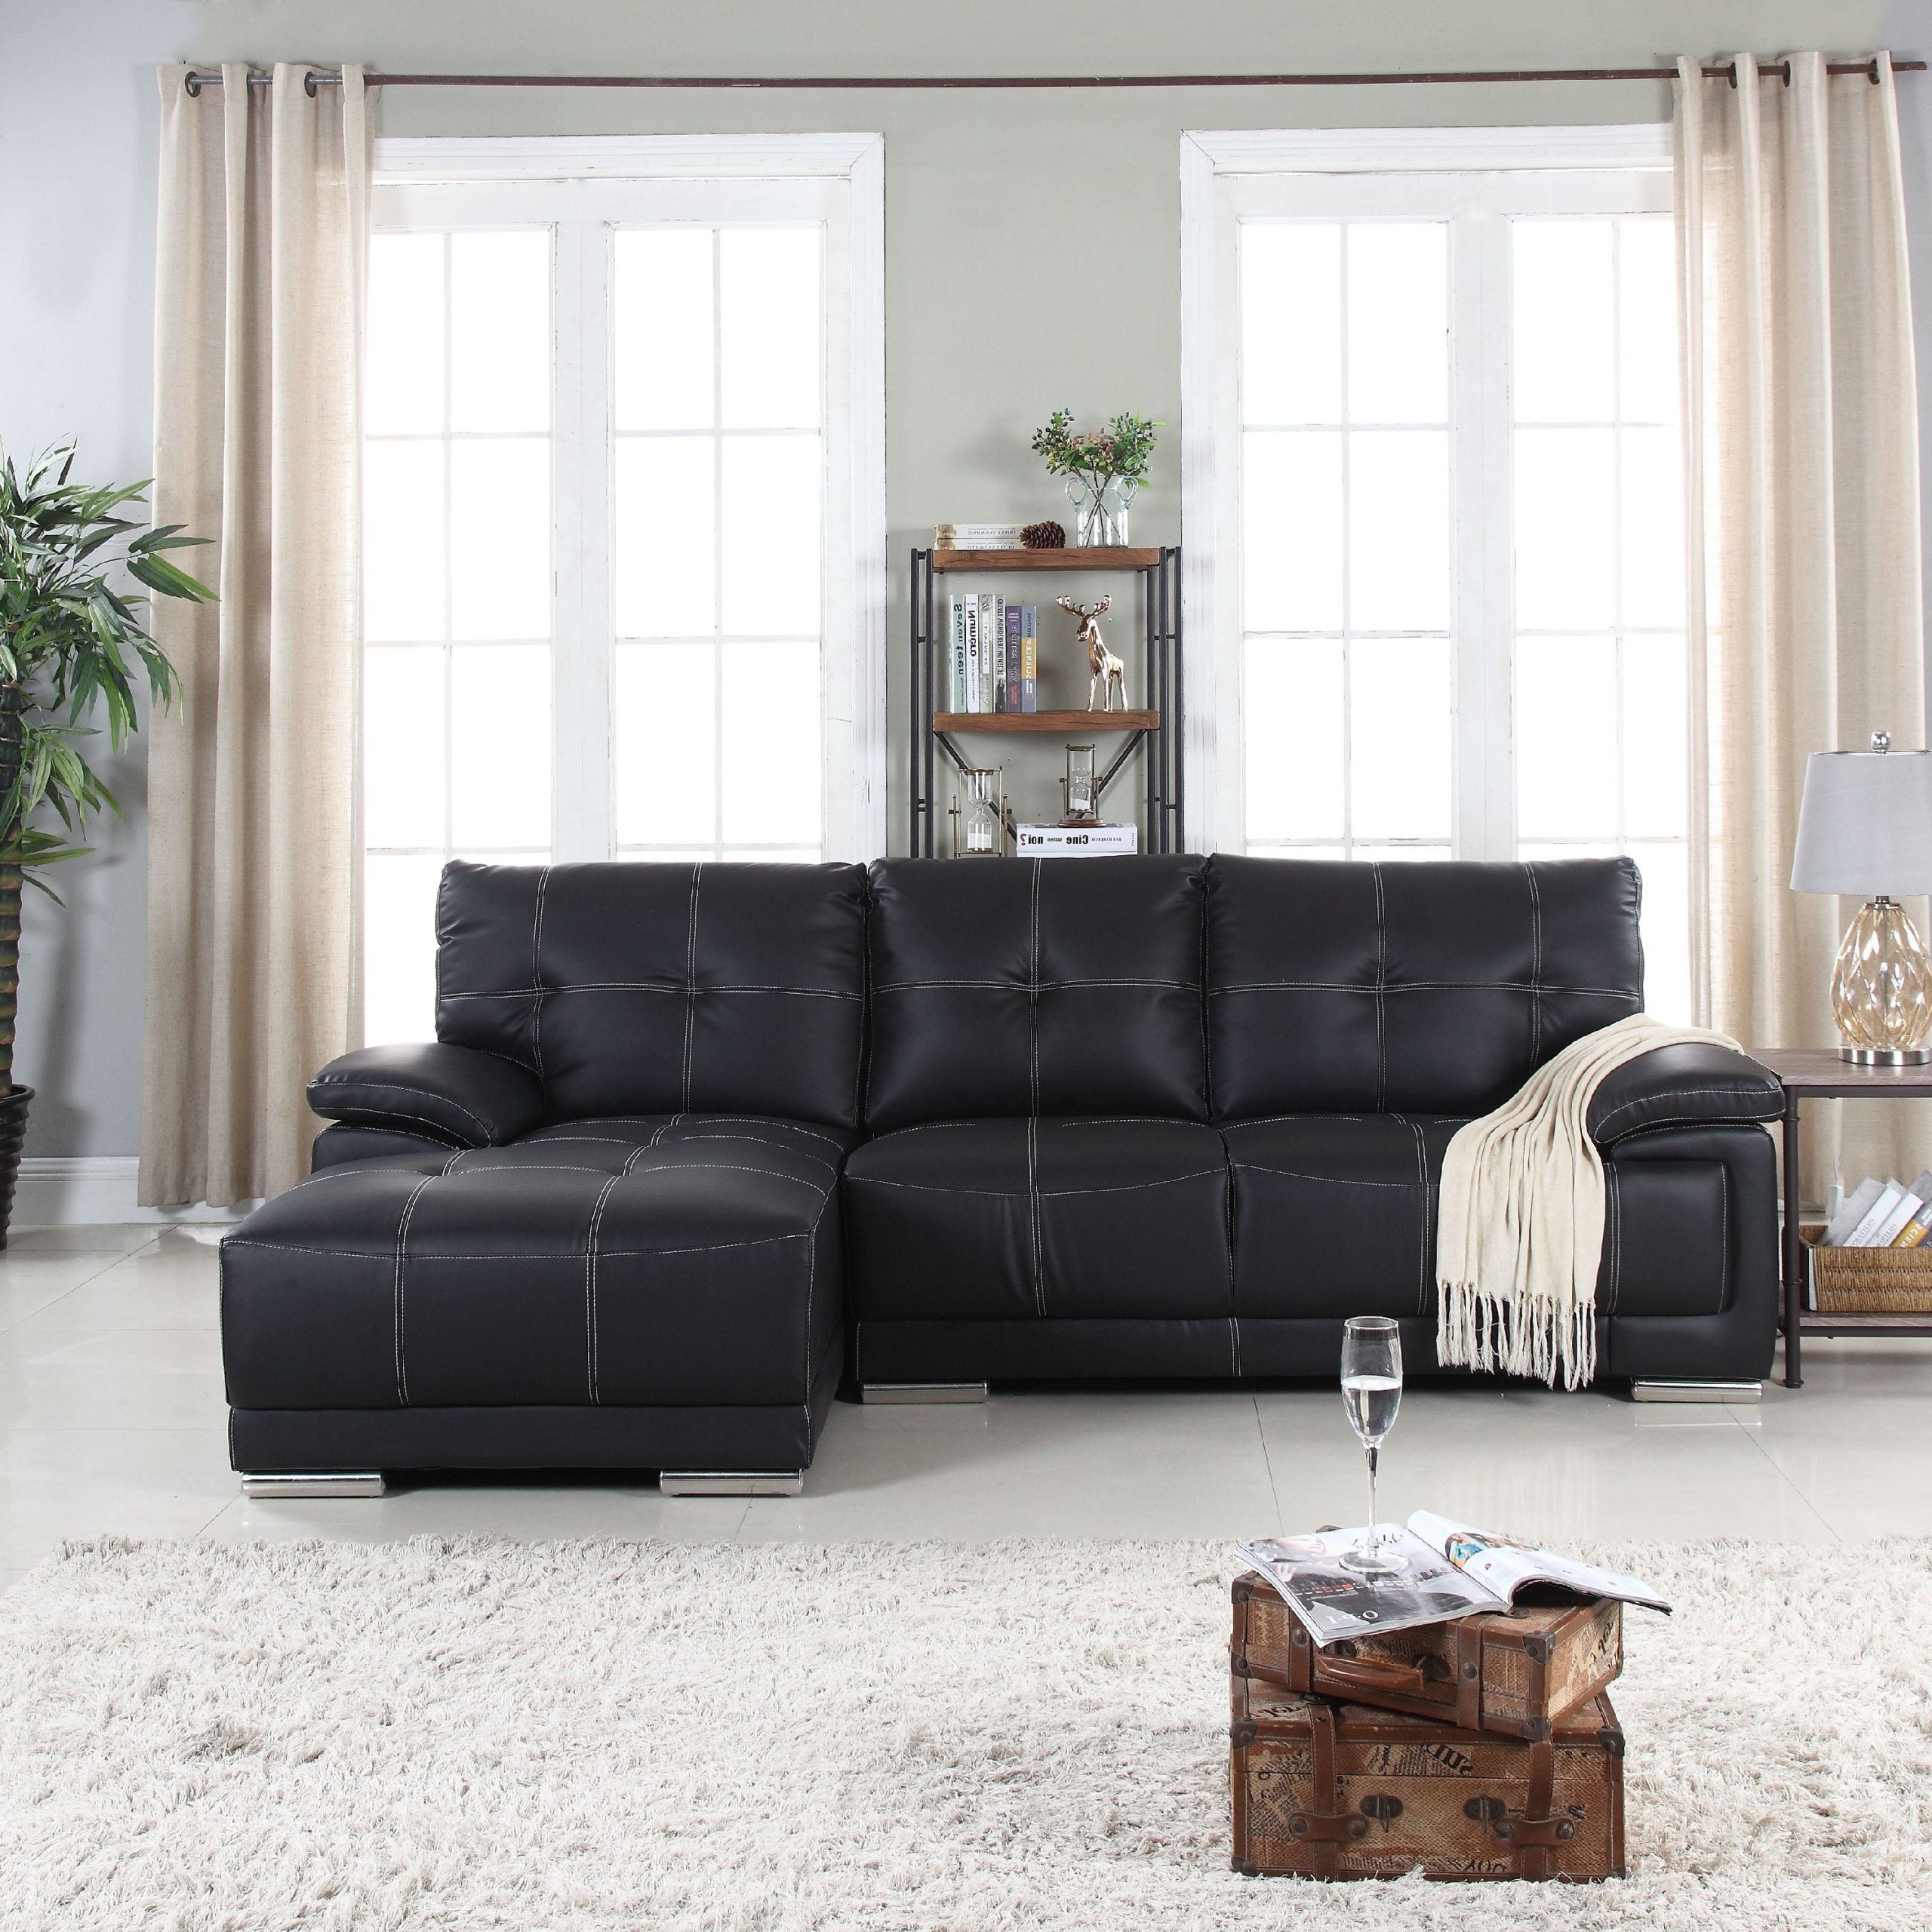 Classic Tufted Faux Leather Sectional Sofa – Walmart With Faux Leather Sofas In Chocolate Brown (View 17 of 20)